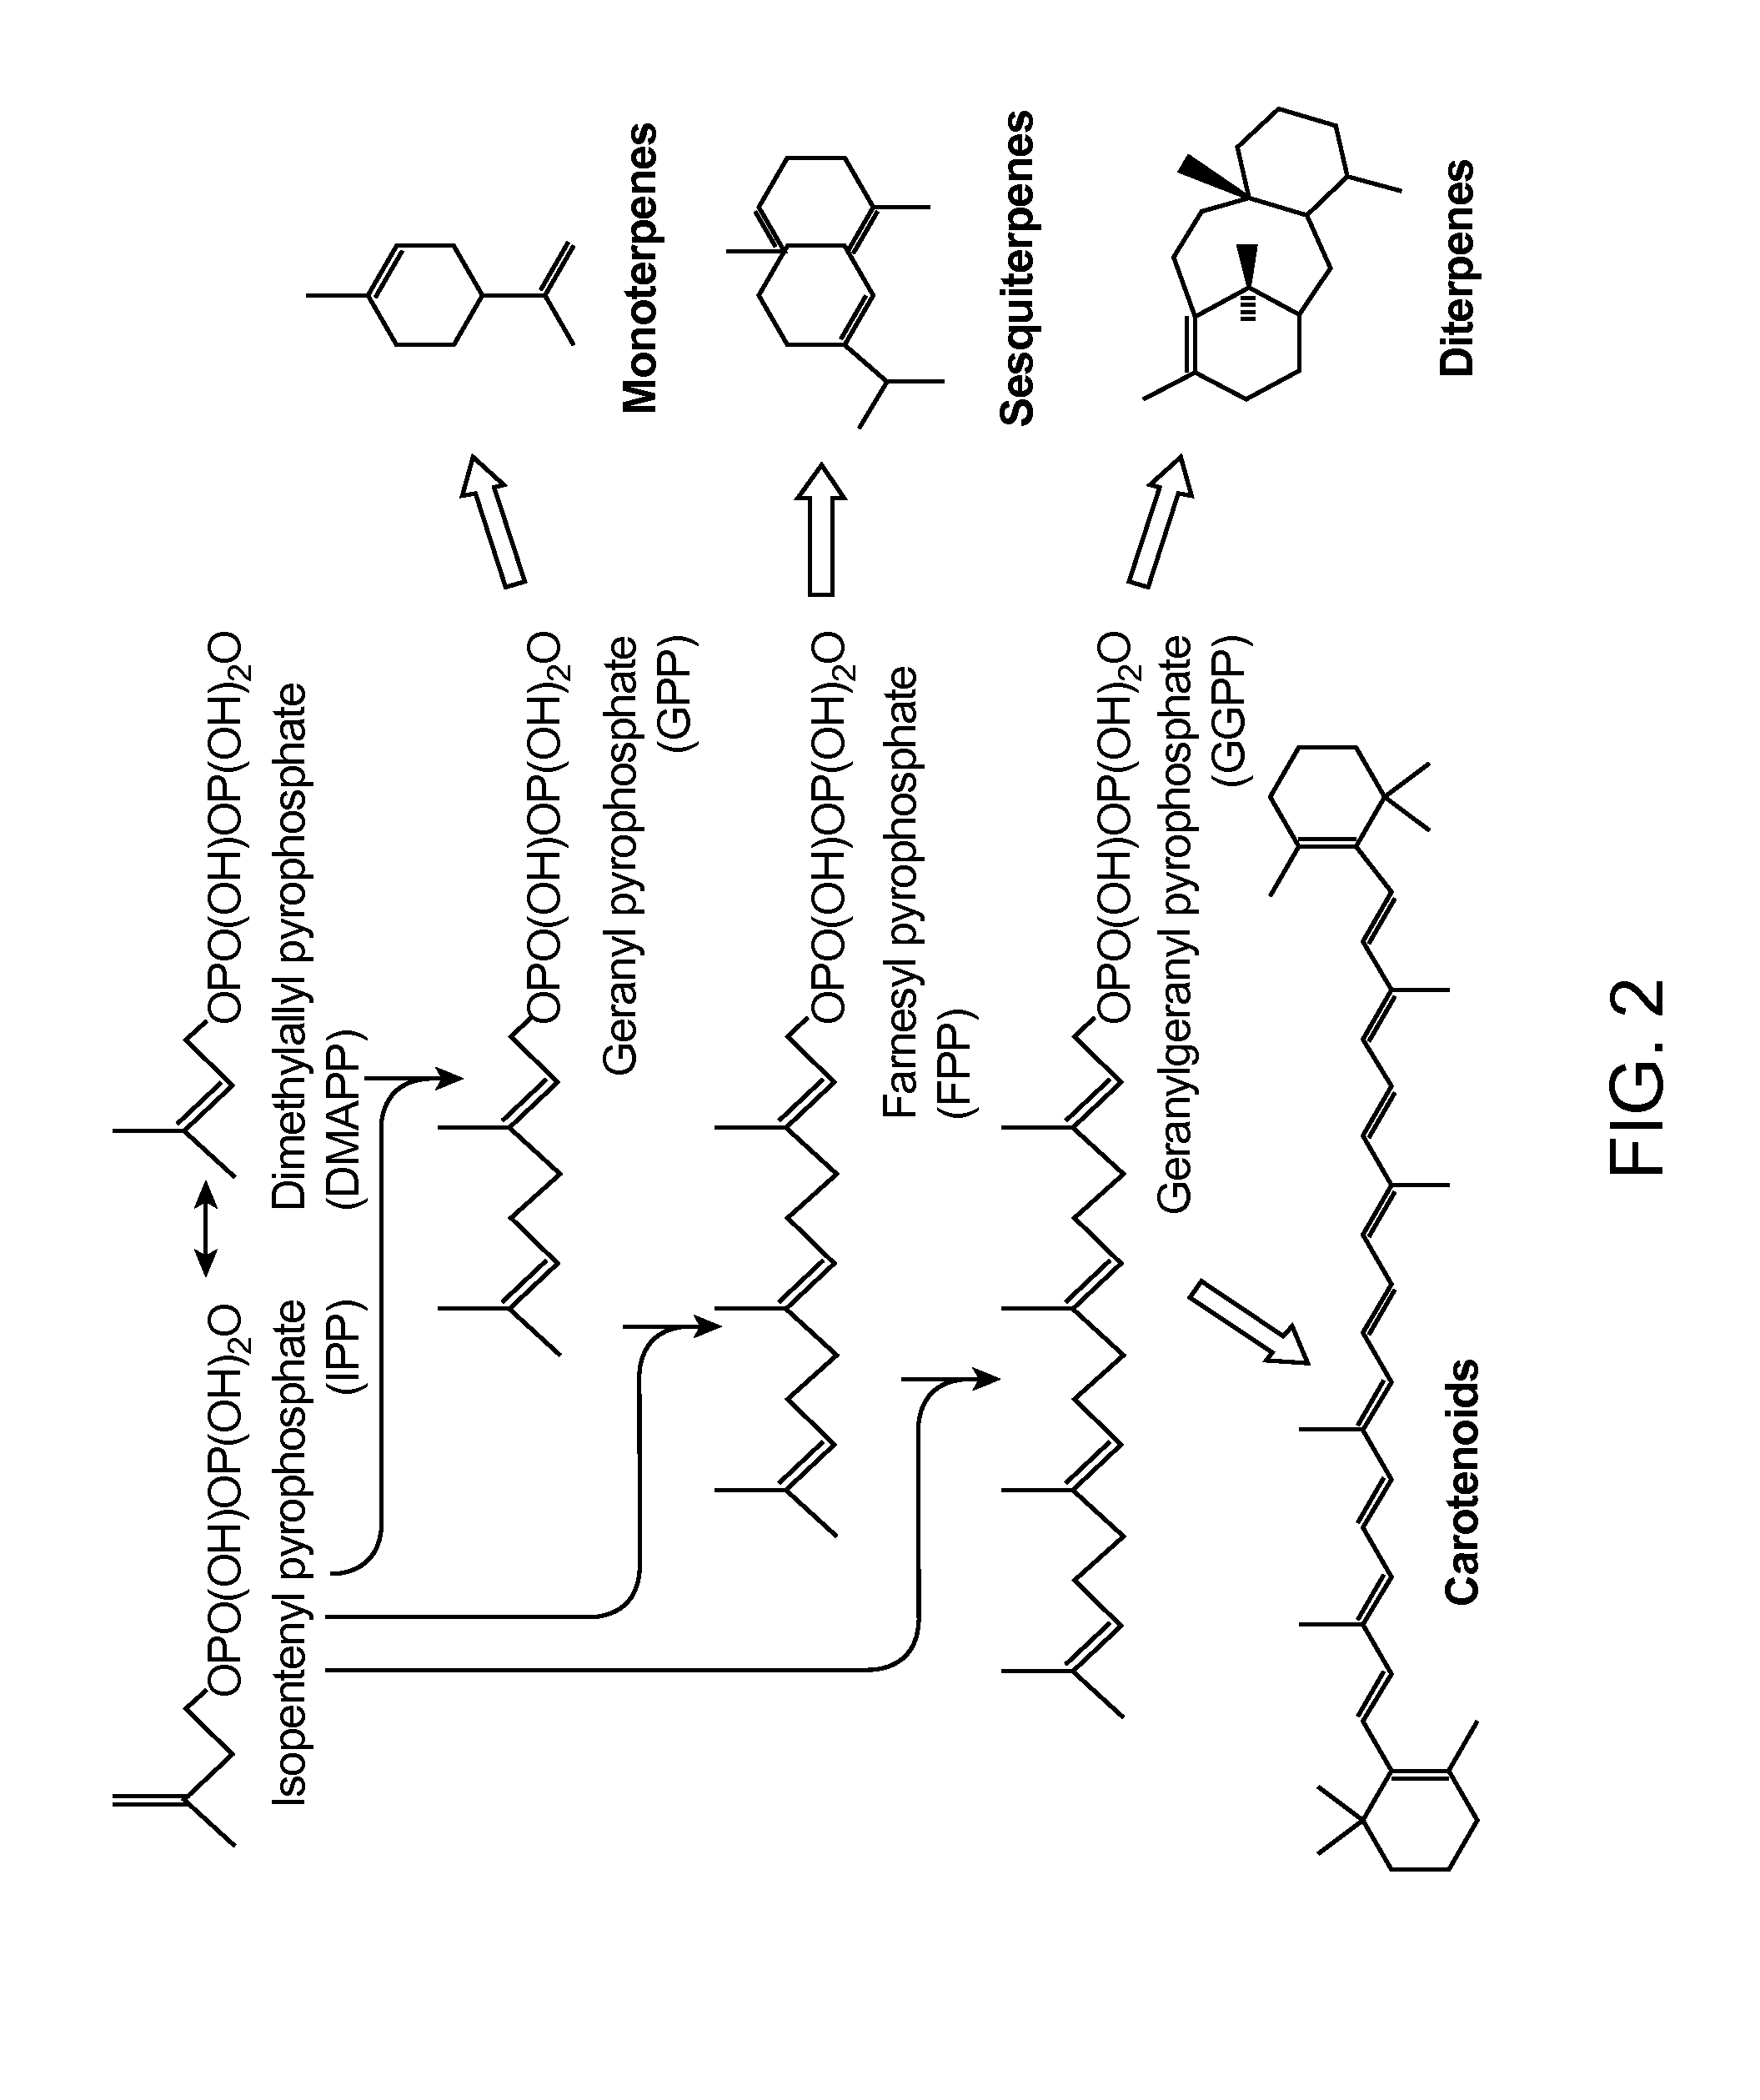 Production of acetyl-coenzyme a derived isoprenoids